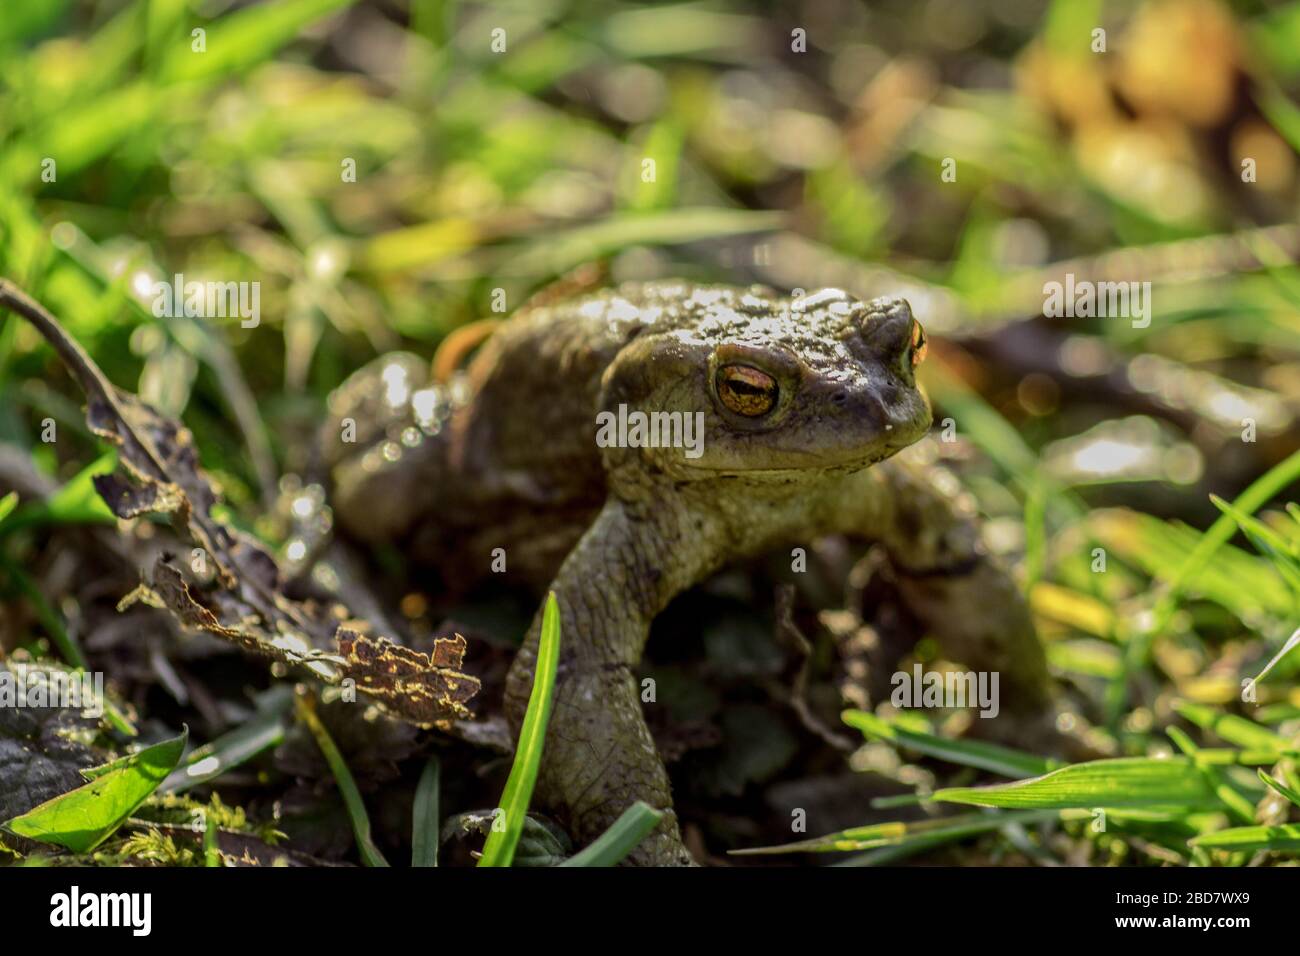 a toad / frog, amphibians Stock Photo